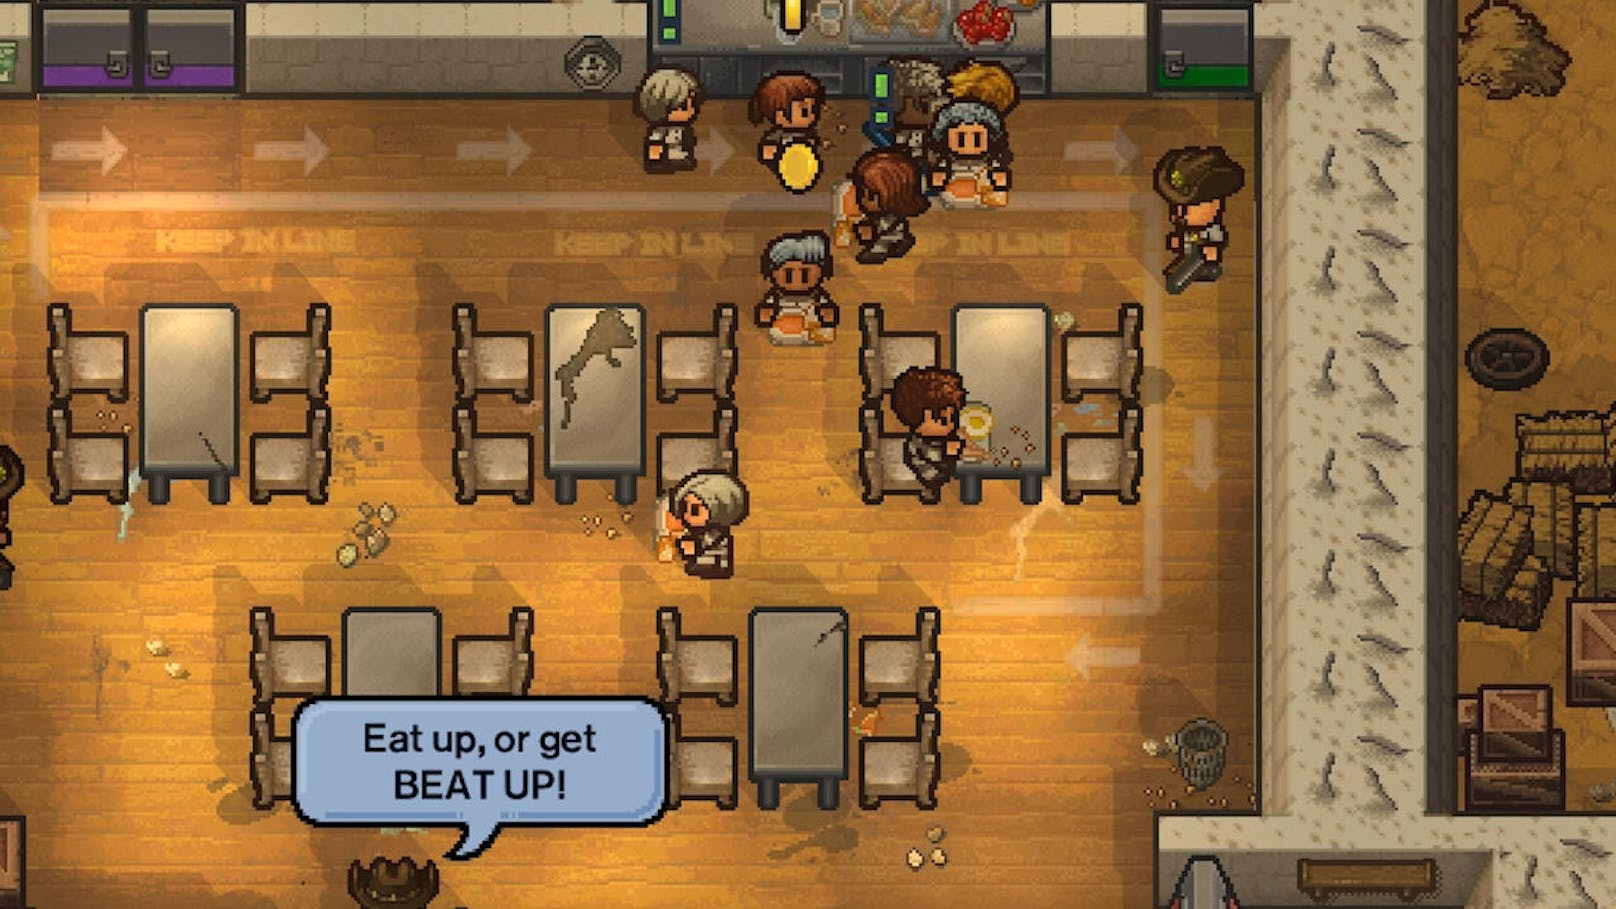  <a href="https://www.heute.at/digital/games/story/The-Escapists-2-im-Test--45931729" target="_blank">The Escapists 2</a>